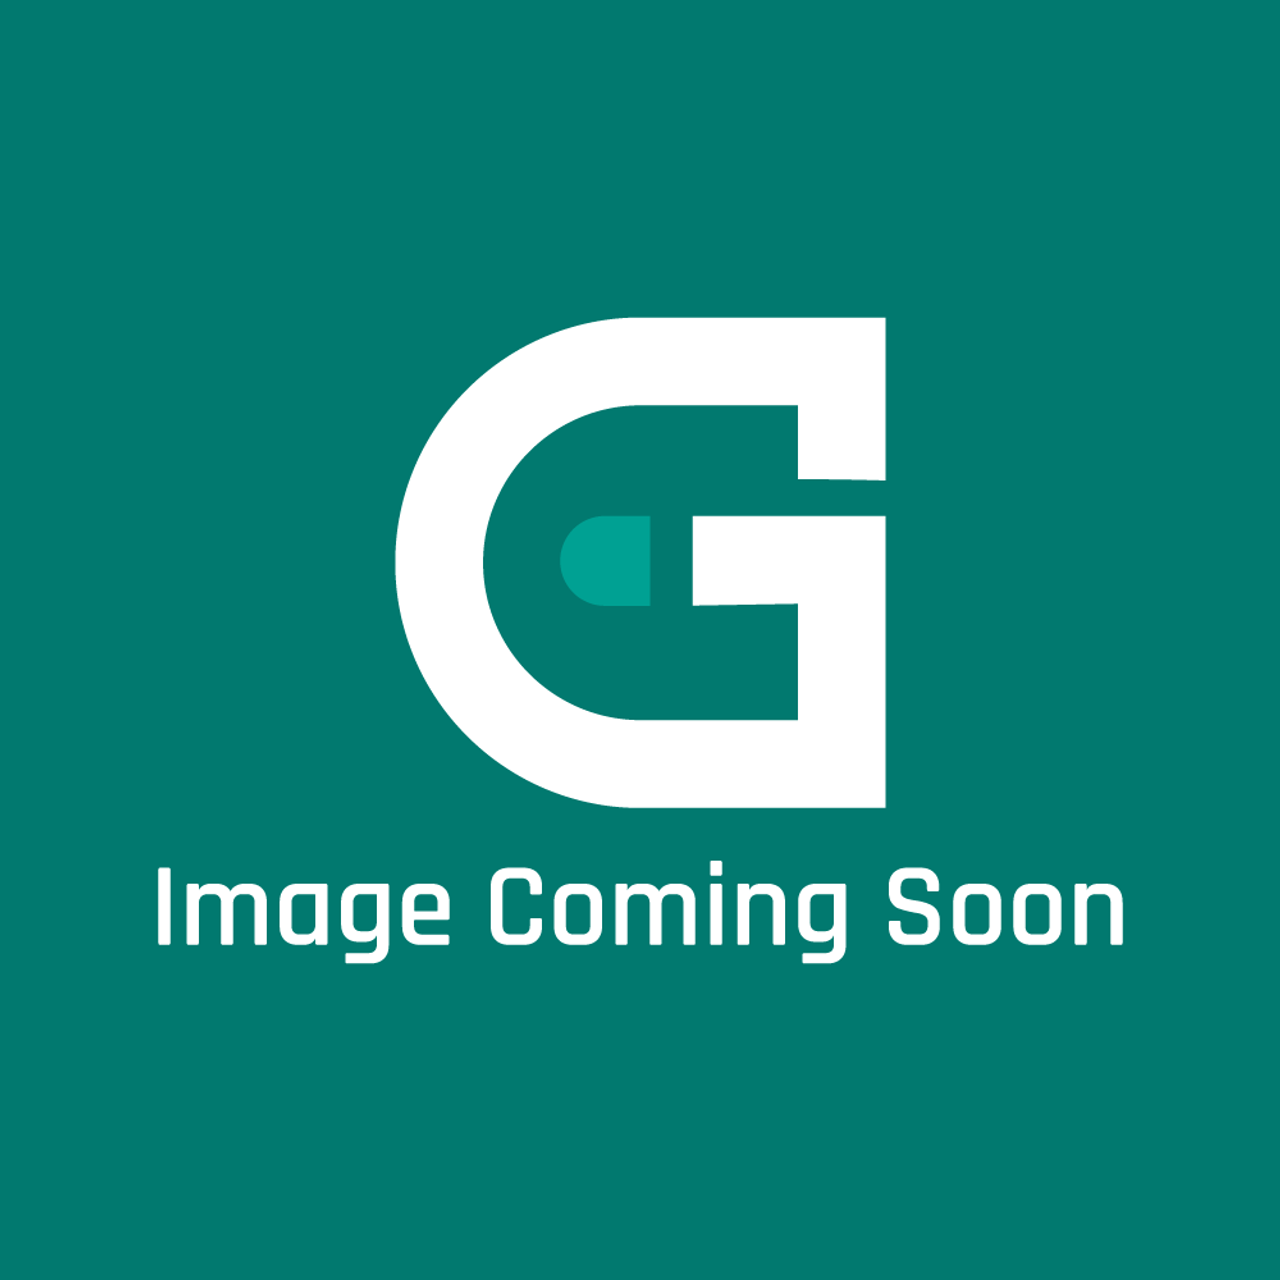 Frigidaire - Electrolux 5304411659 - Front-Storage Pan - Image Coming Soon!